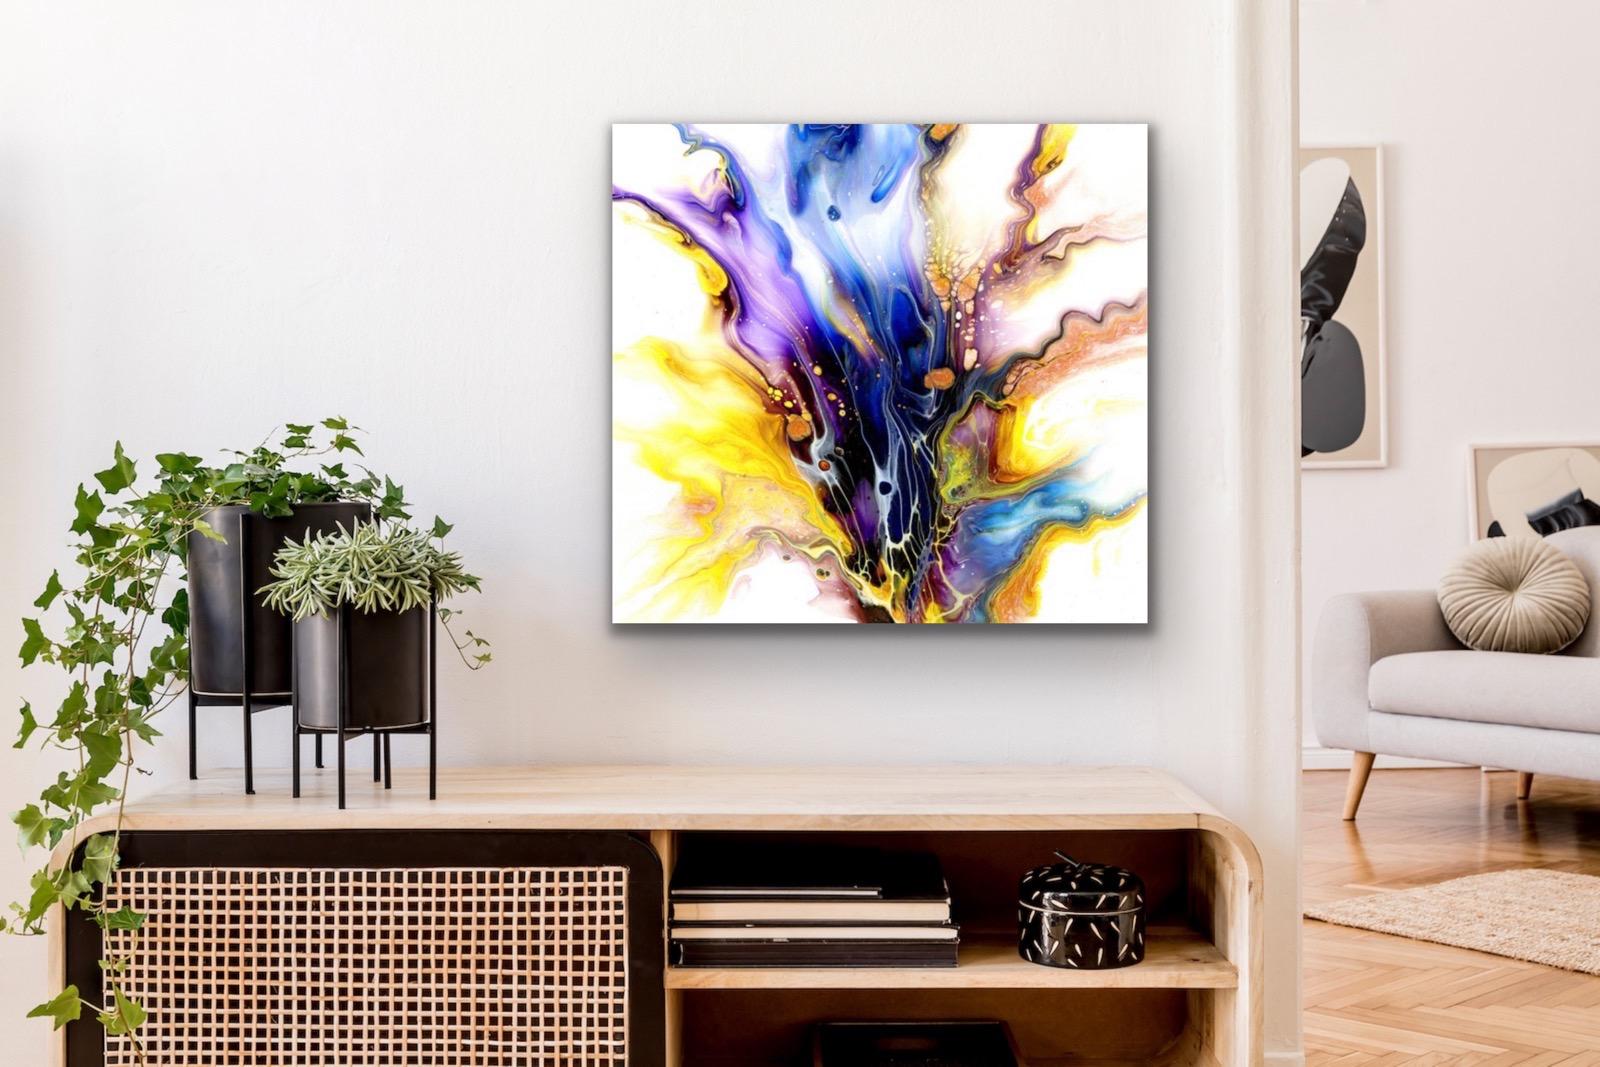 Modern Industrial Abstract Giclee Print on Metal, Contemporary Painting by Cessy For Sale 2